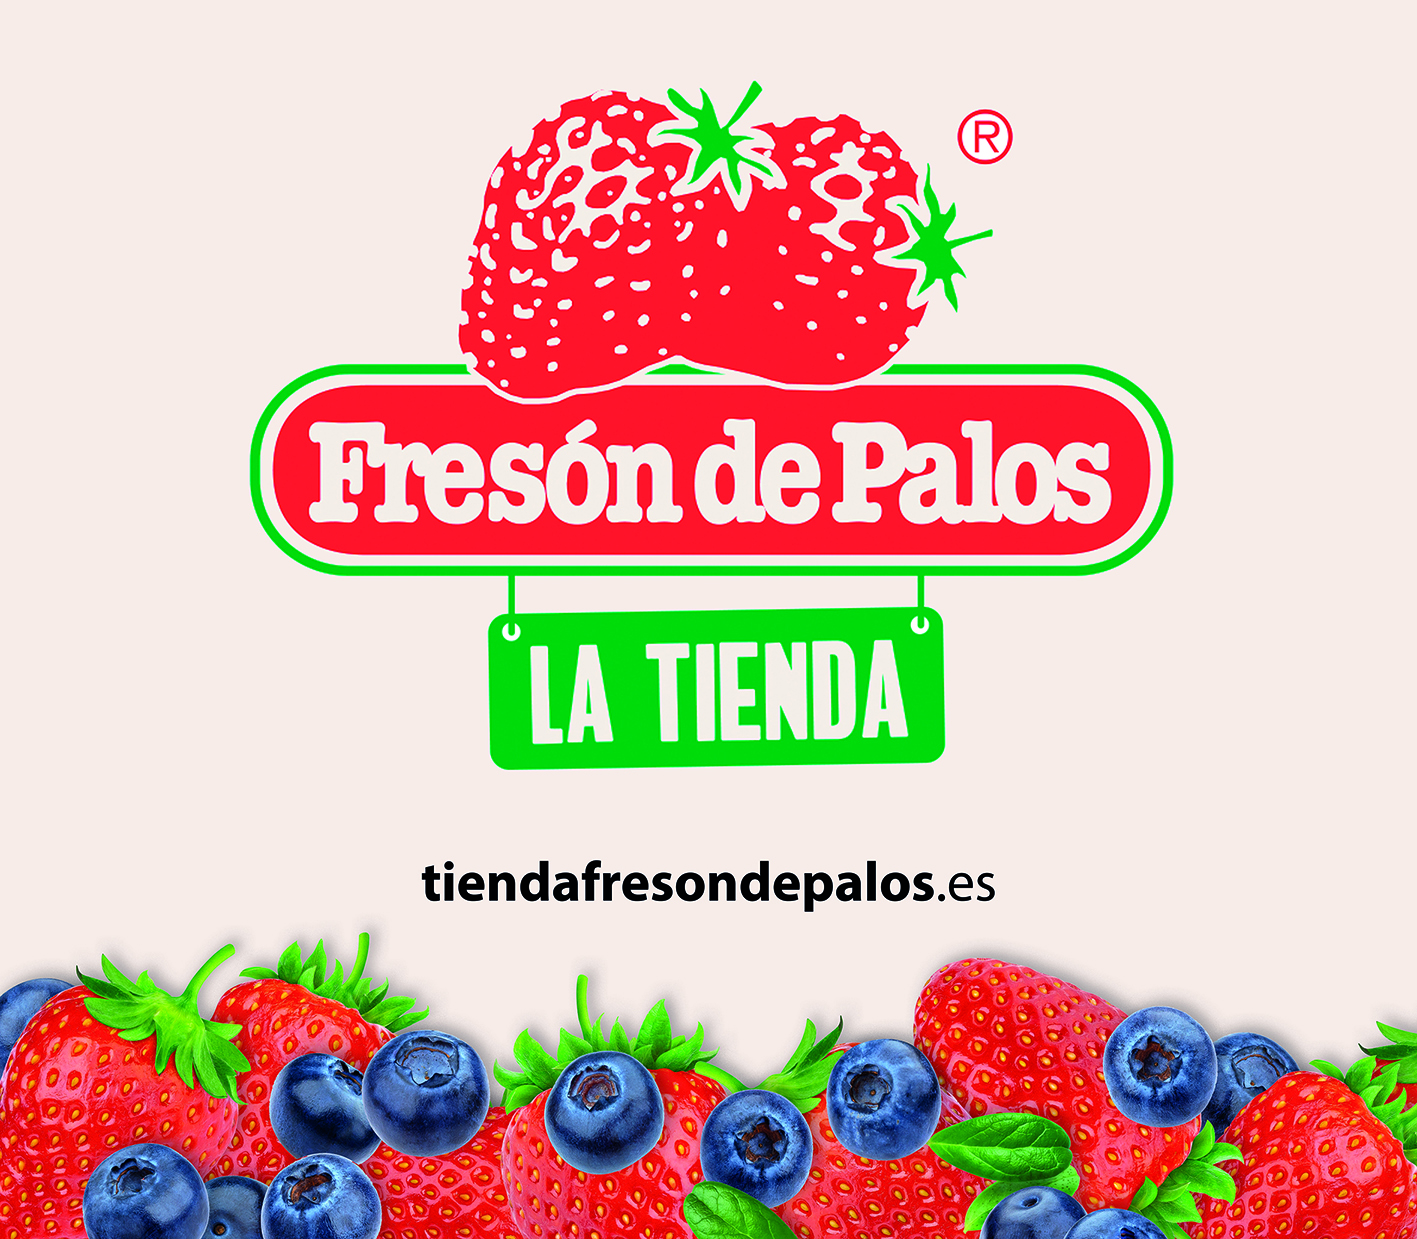 E-commerce arrives in Spain’s berry sector